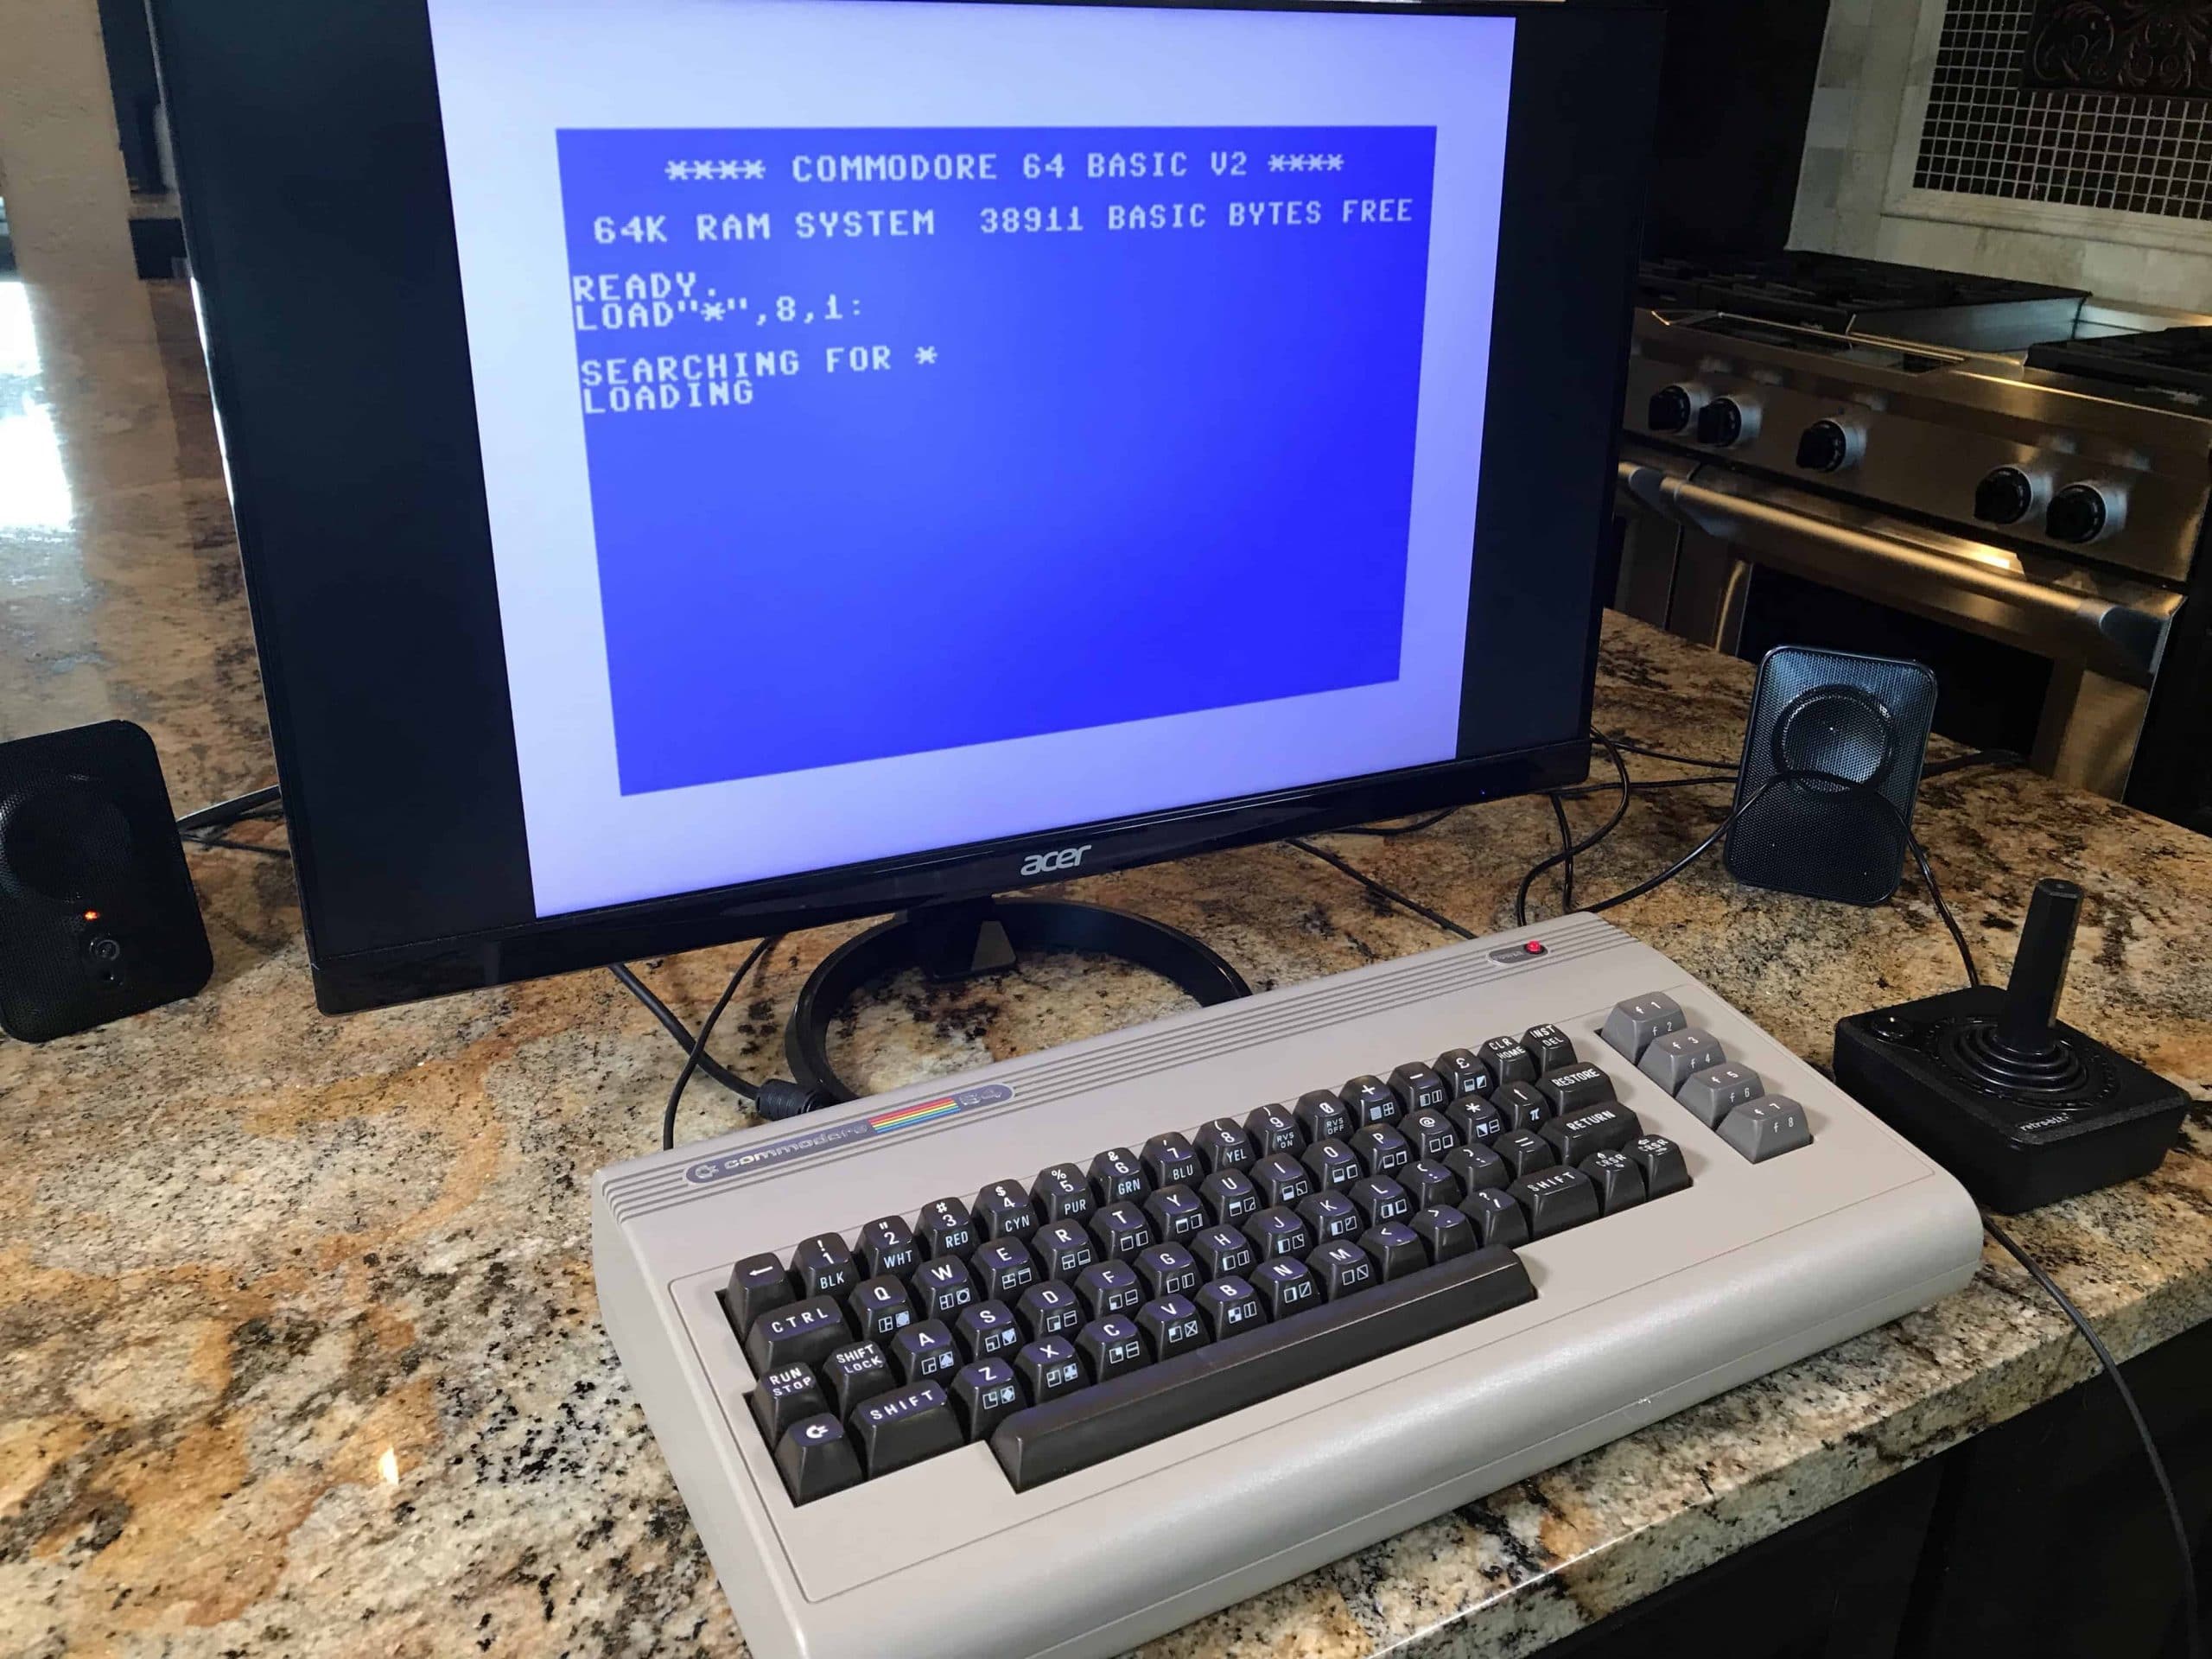 Building A New Commodore 64 In 2022 With All New Components